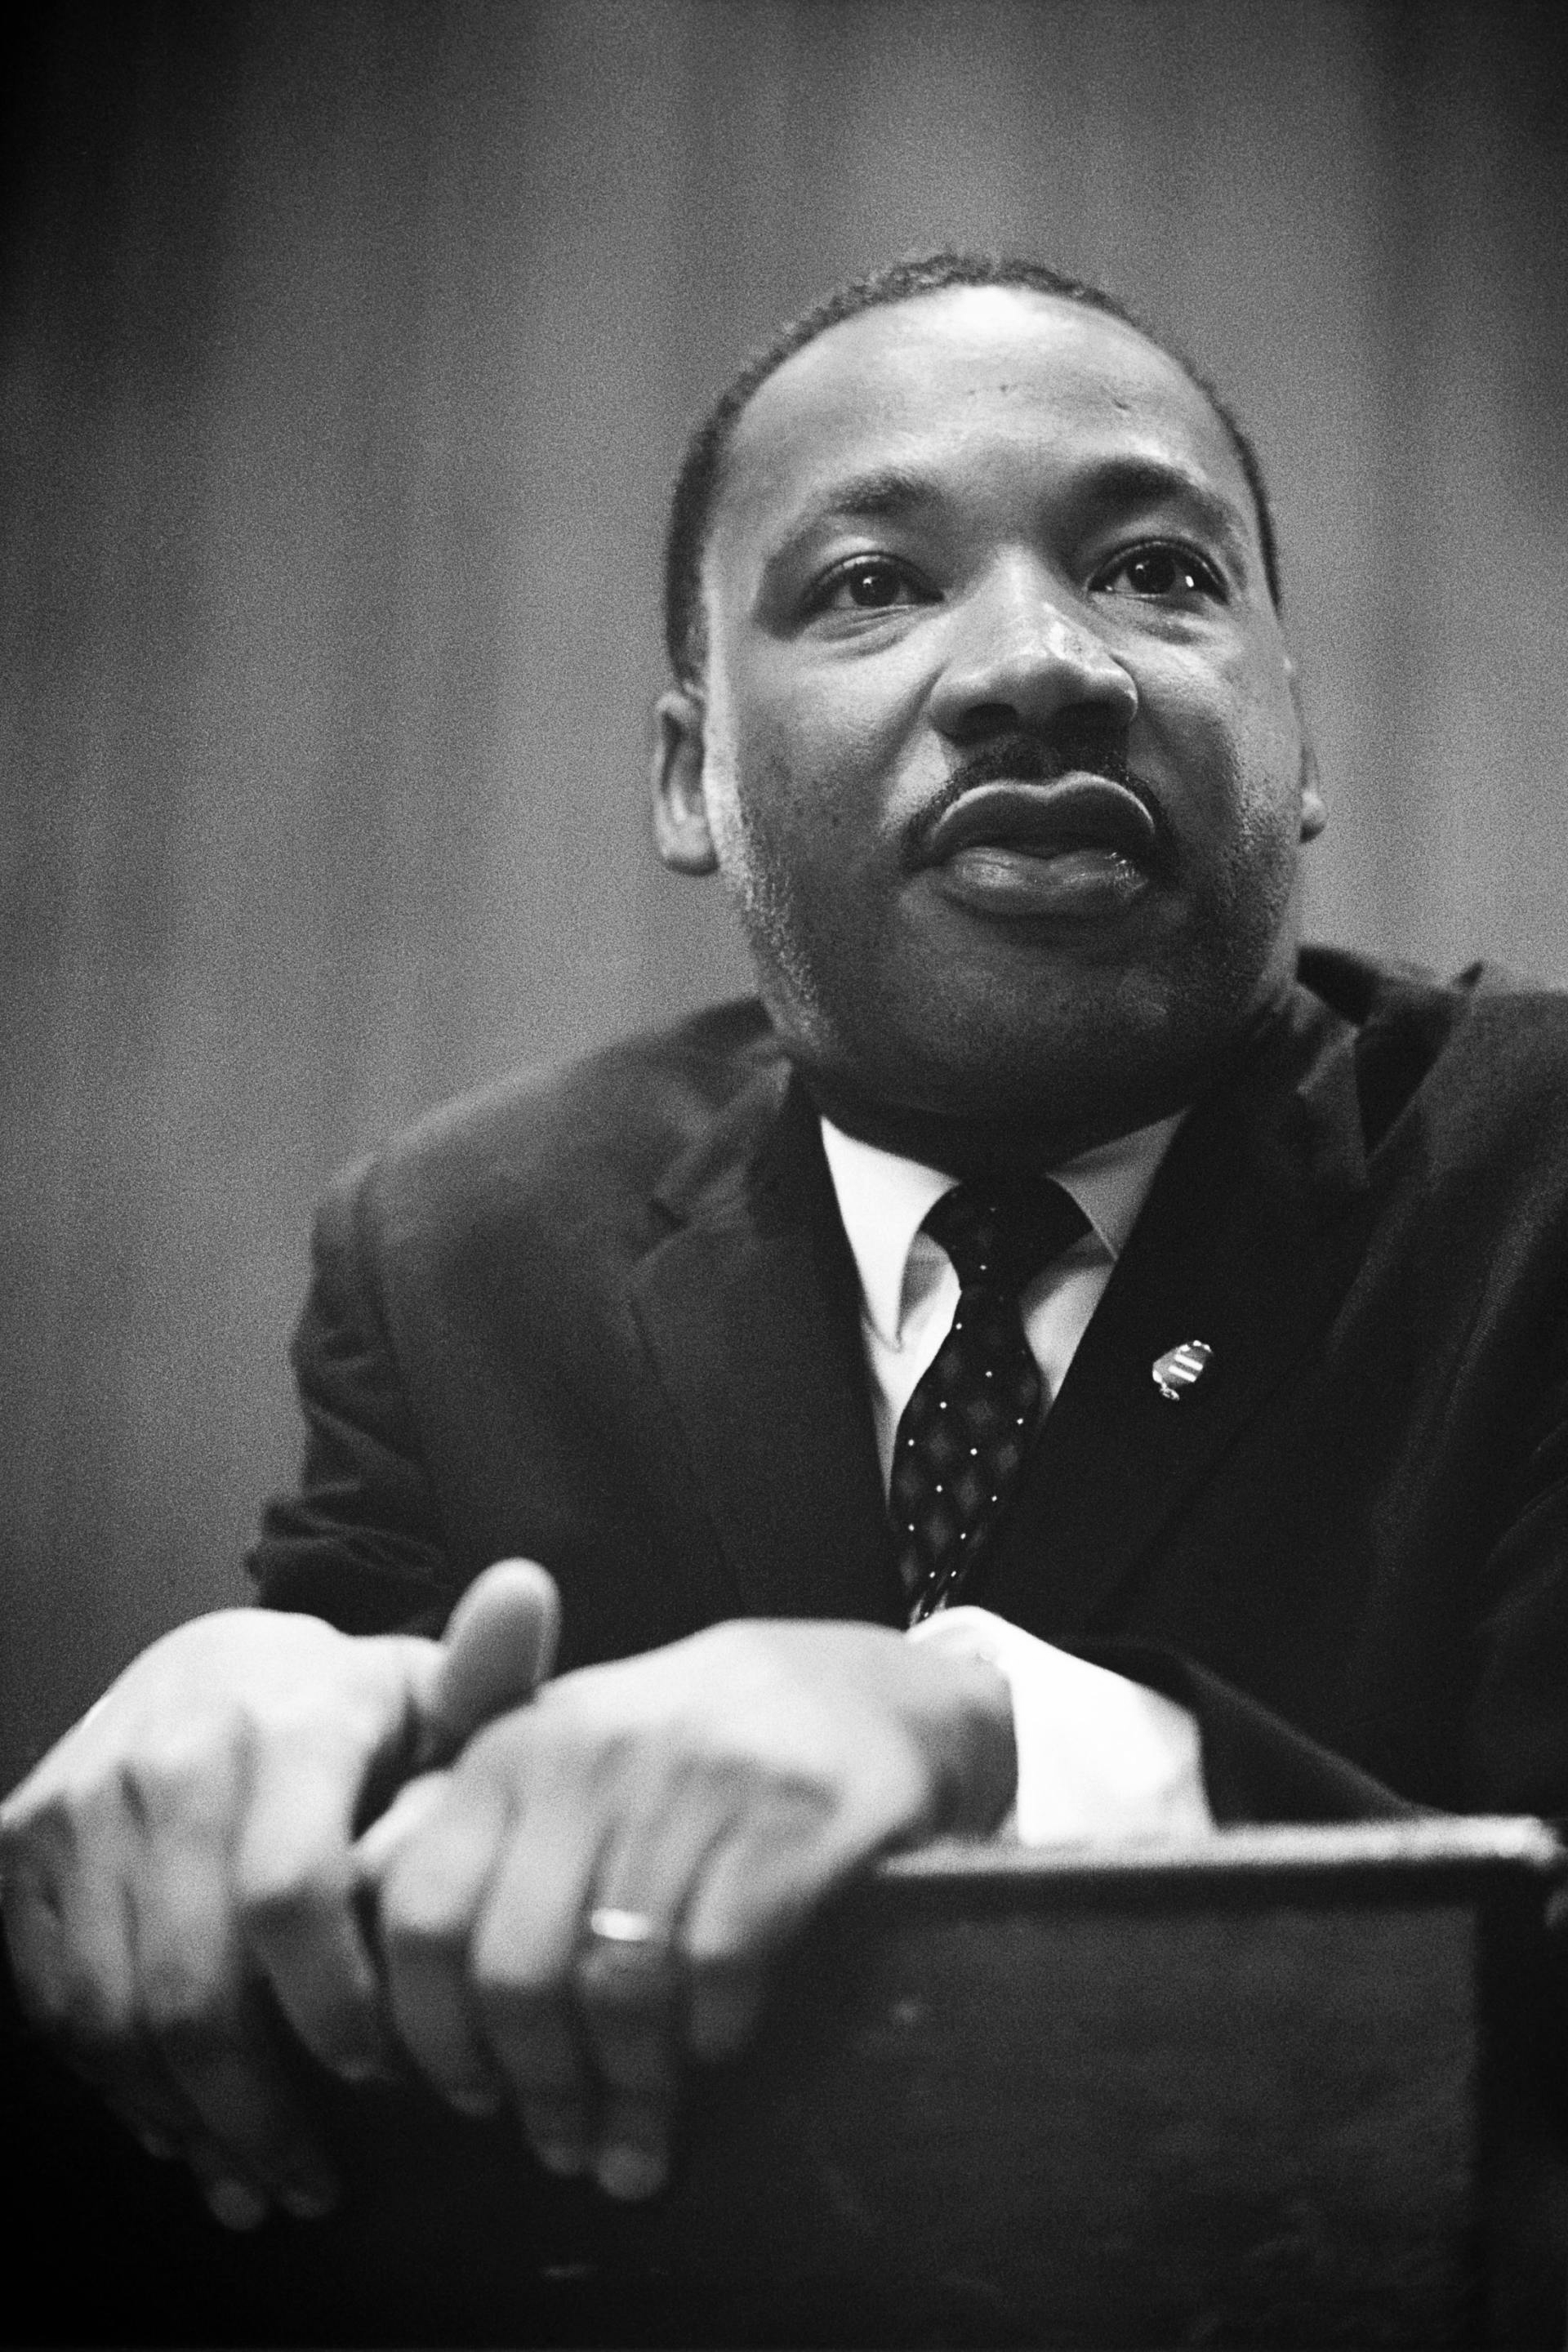 A Different Perspective on Dr. Martin Luther King, Jr.